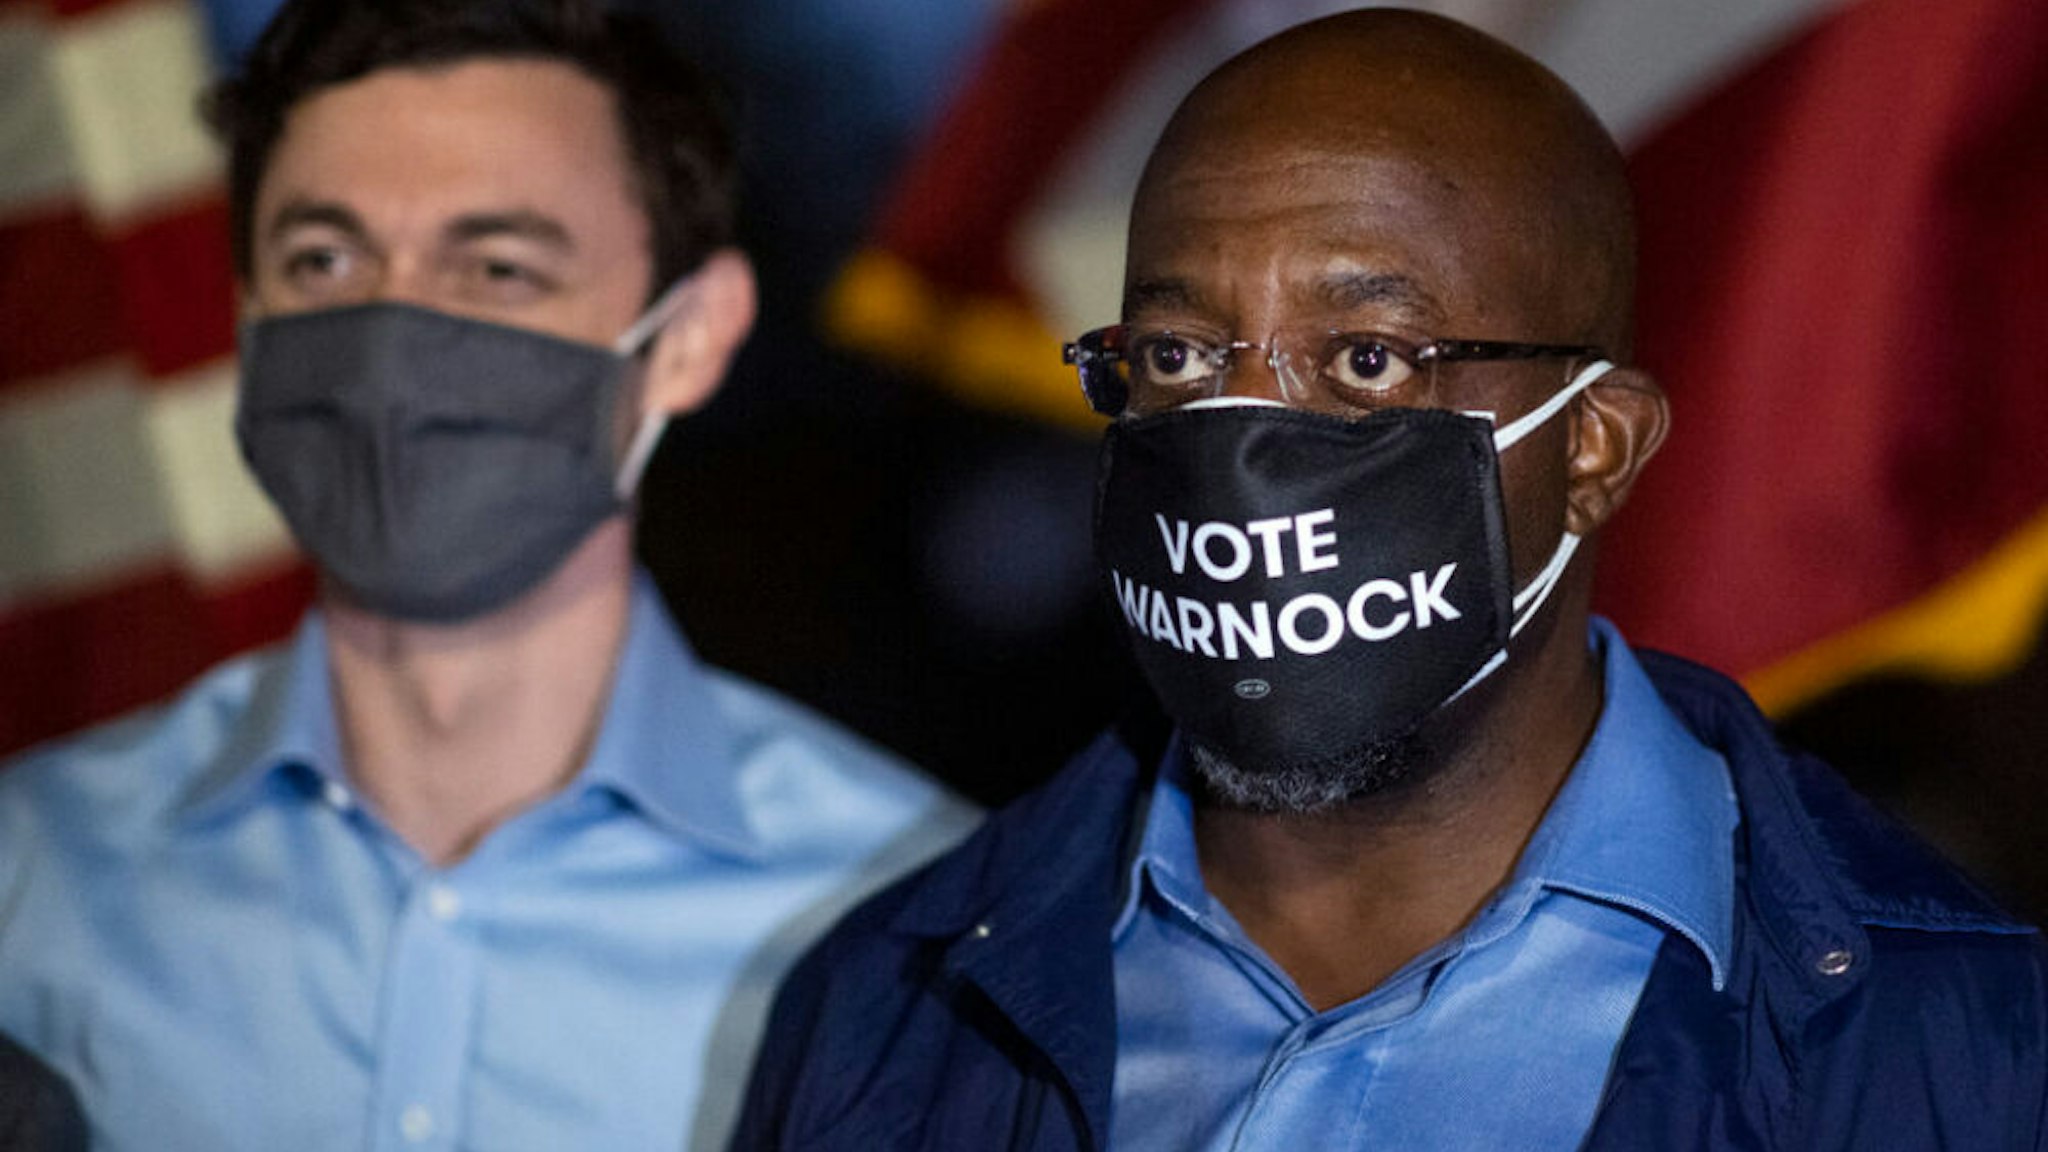 UNITED STATES - OCTOBER 29 (FILE): Democratic candidates for Georgia senate Rev. Raphael Warnock, right, and Jon Ossoff, attend a drive-in rally with Muscogee County Democrats at the Civic Center in Columbus, Ga., on Thursday, October 29, 2020.